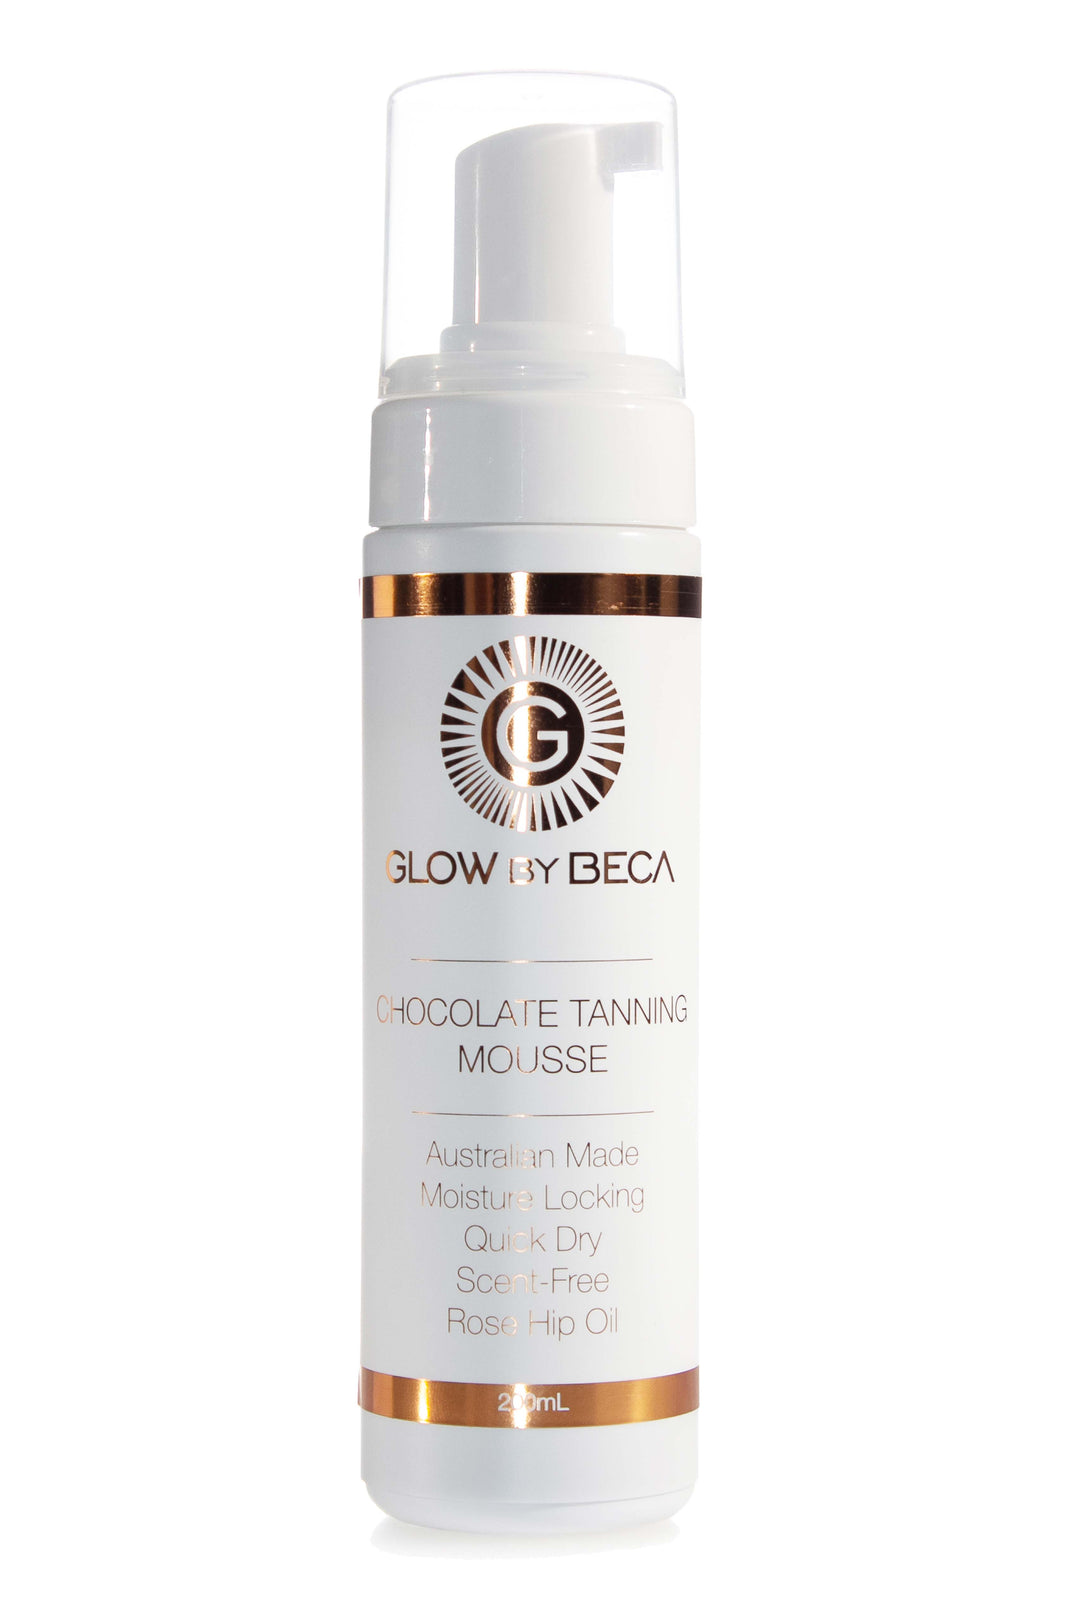 glow-by-beca-chocolate-tanning-mousse-200ml